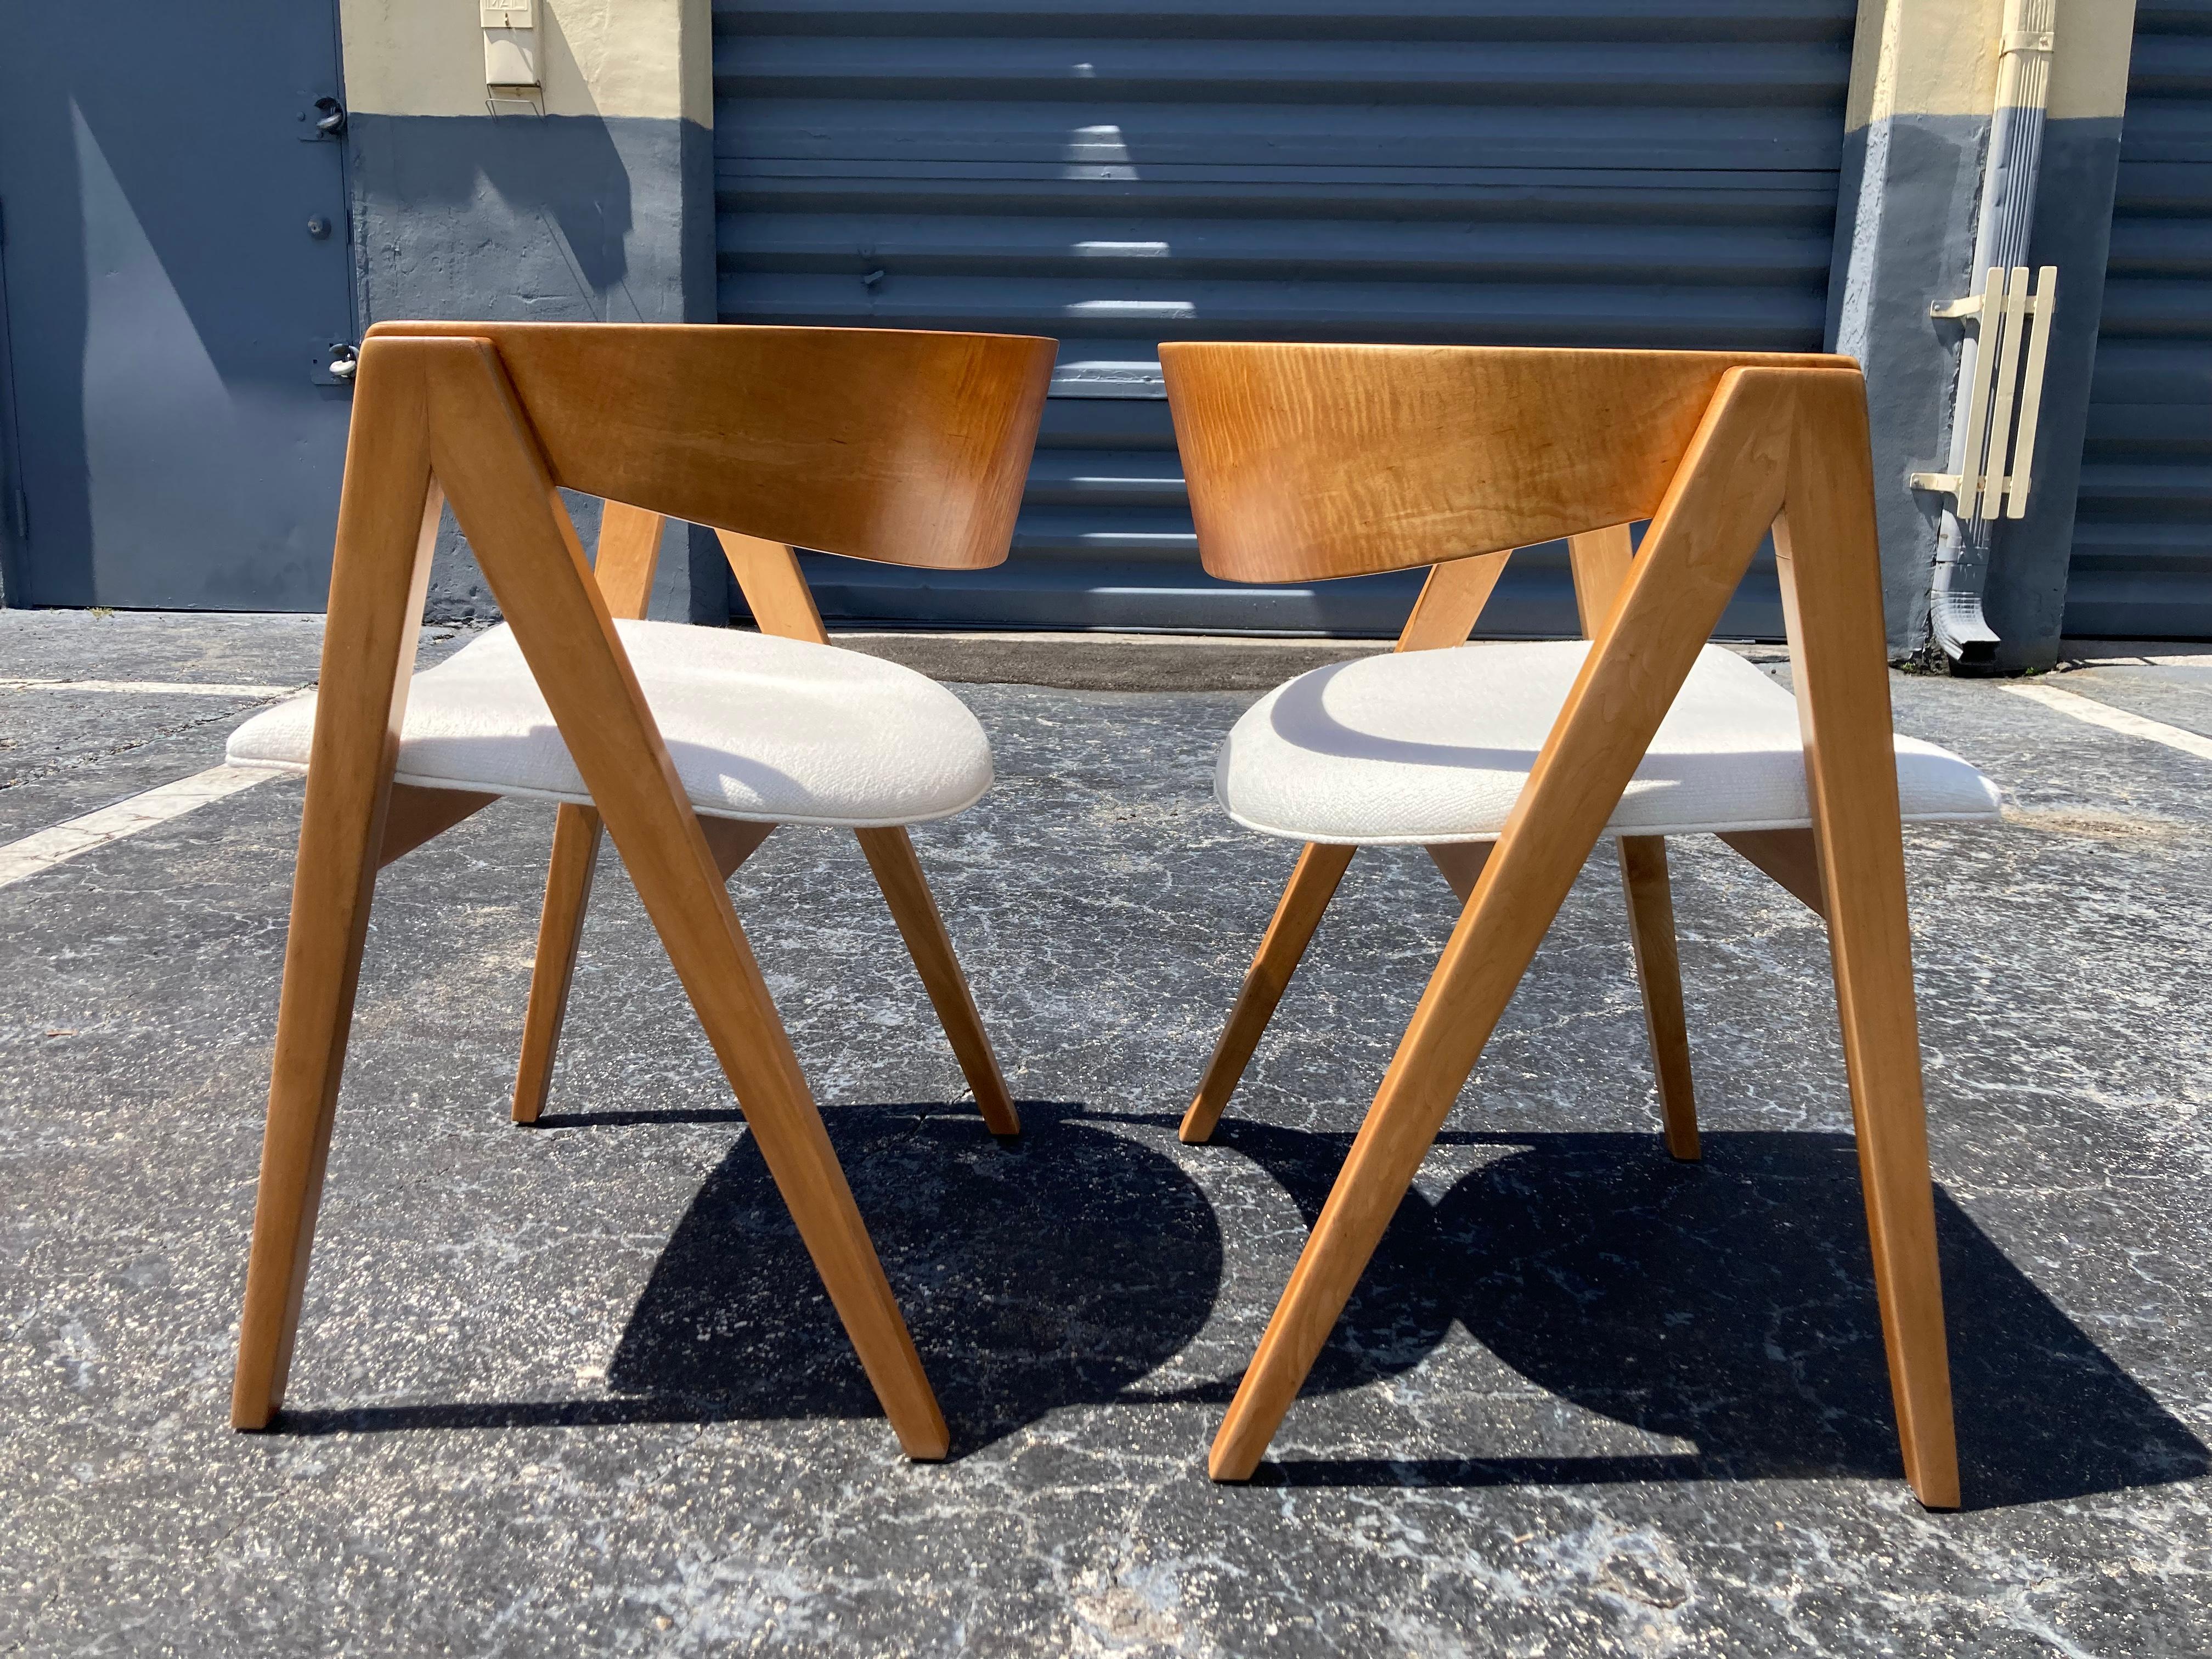 Beautiful Allan Gould Chair, Bentwood, Birch and Fabric covered seat. Price is per chair. Two chairs in total available.